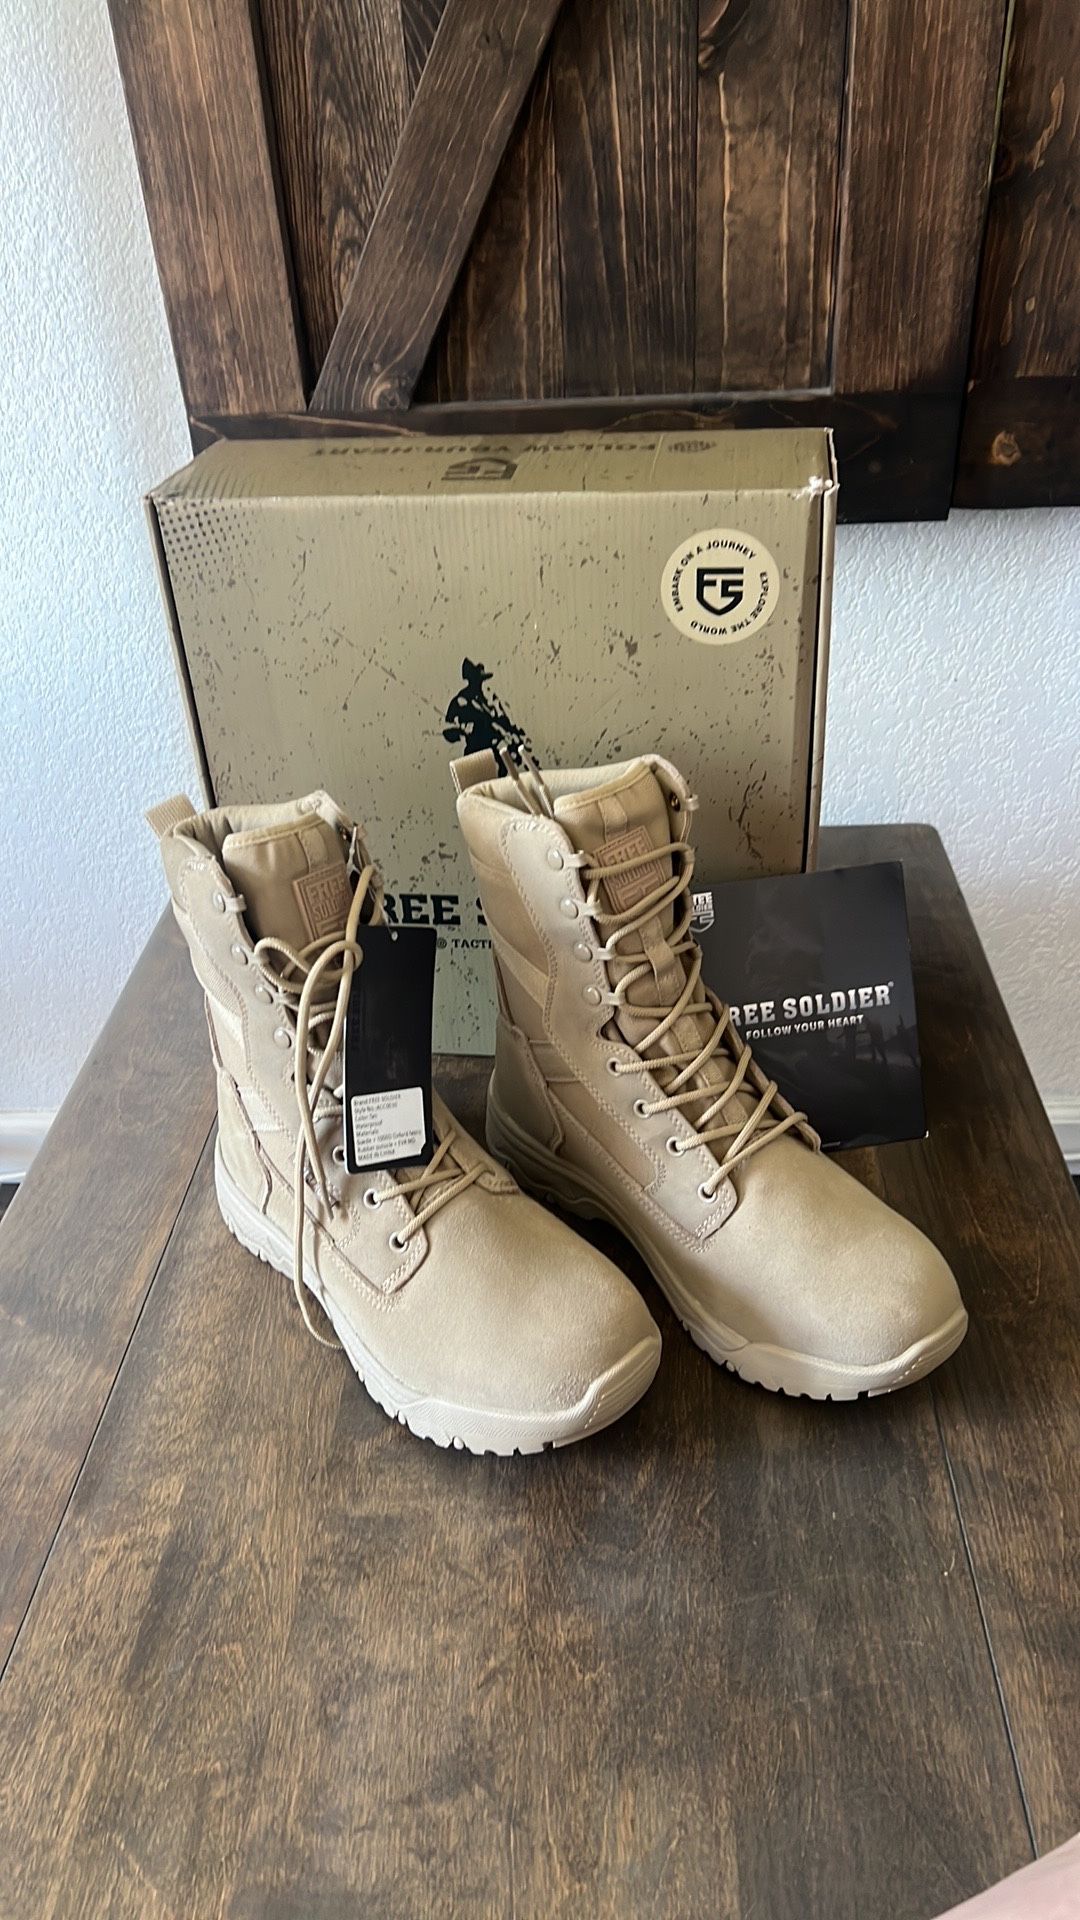 Free Soldier ACC0030 Mens Tan Waterproof Ankle Military Boots Size US 9